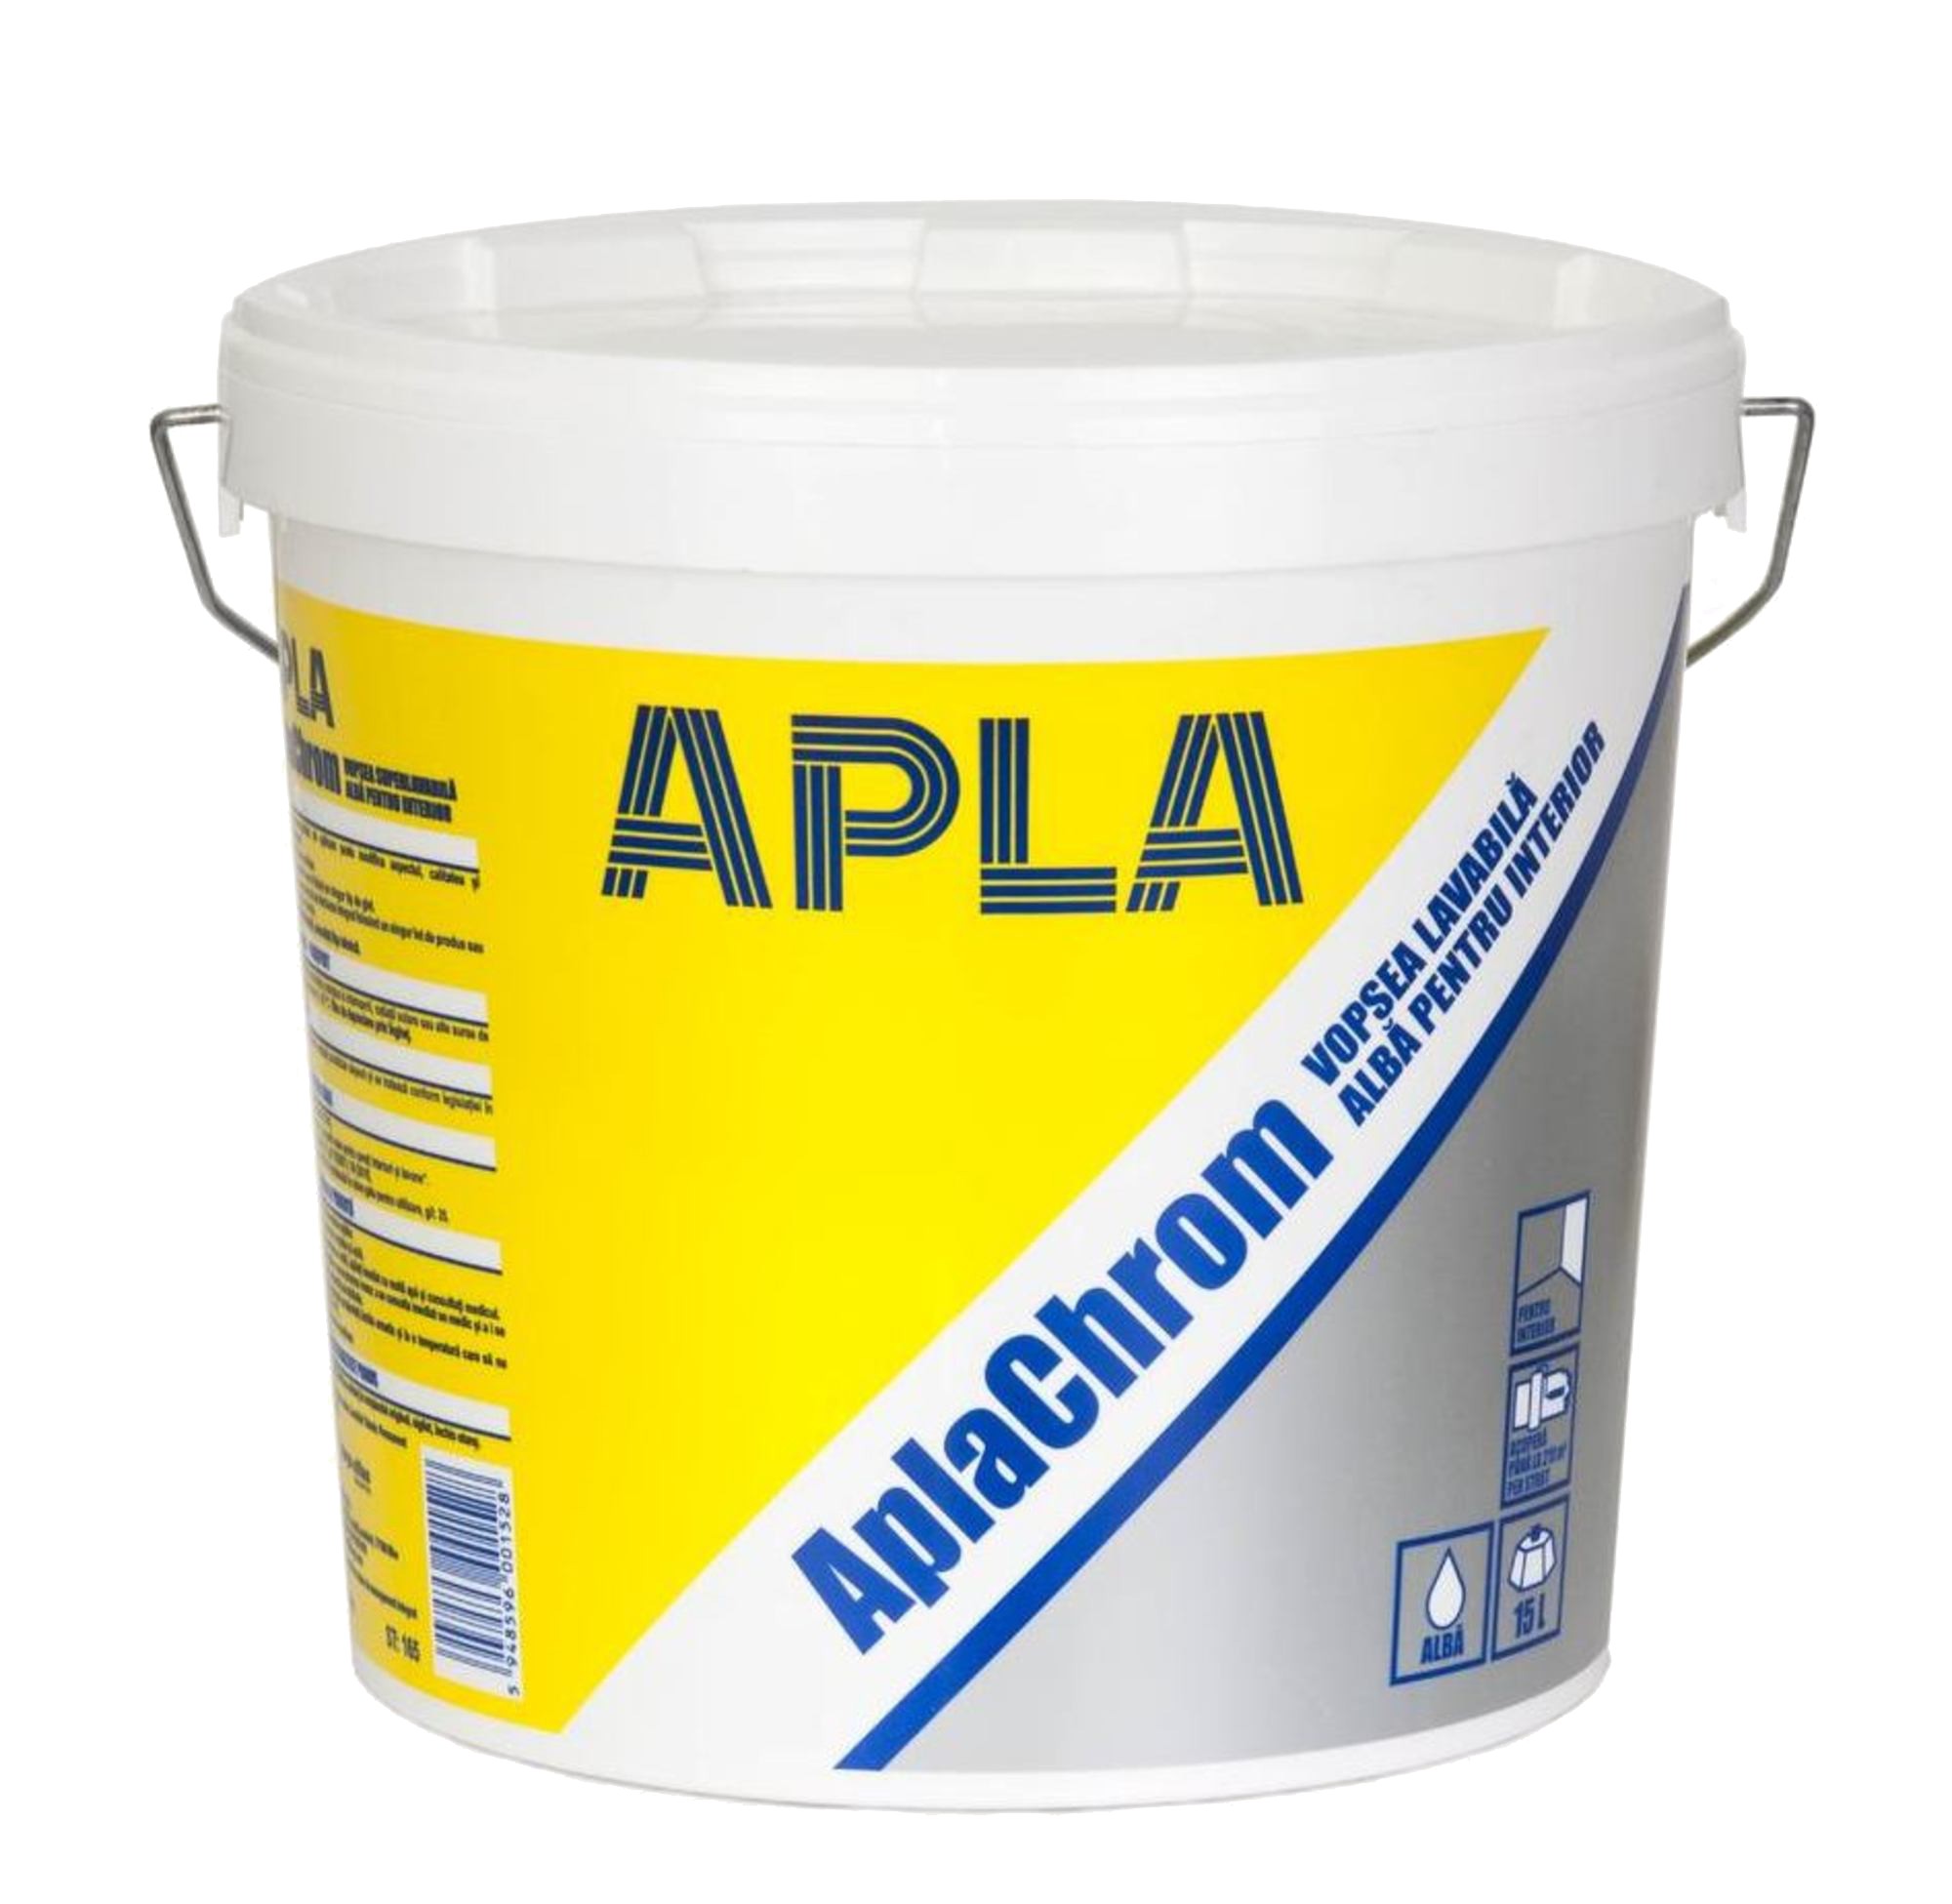 Paints - White washable paint for interior AplaChrom 25L, https:maxbau.ro